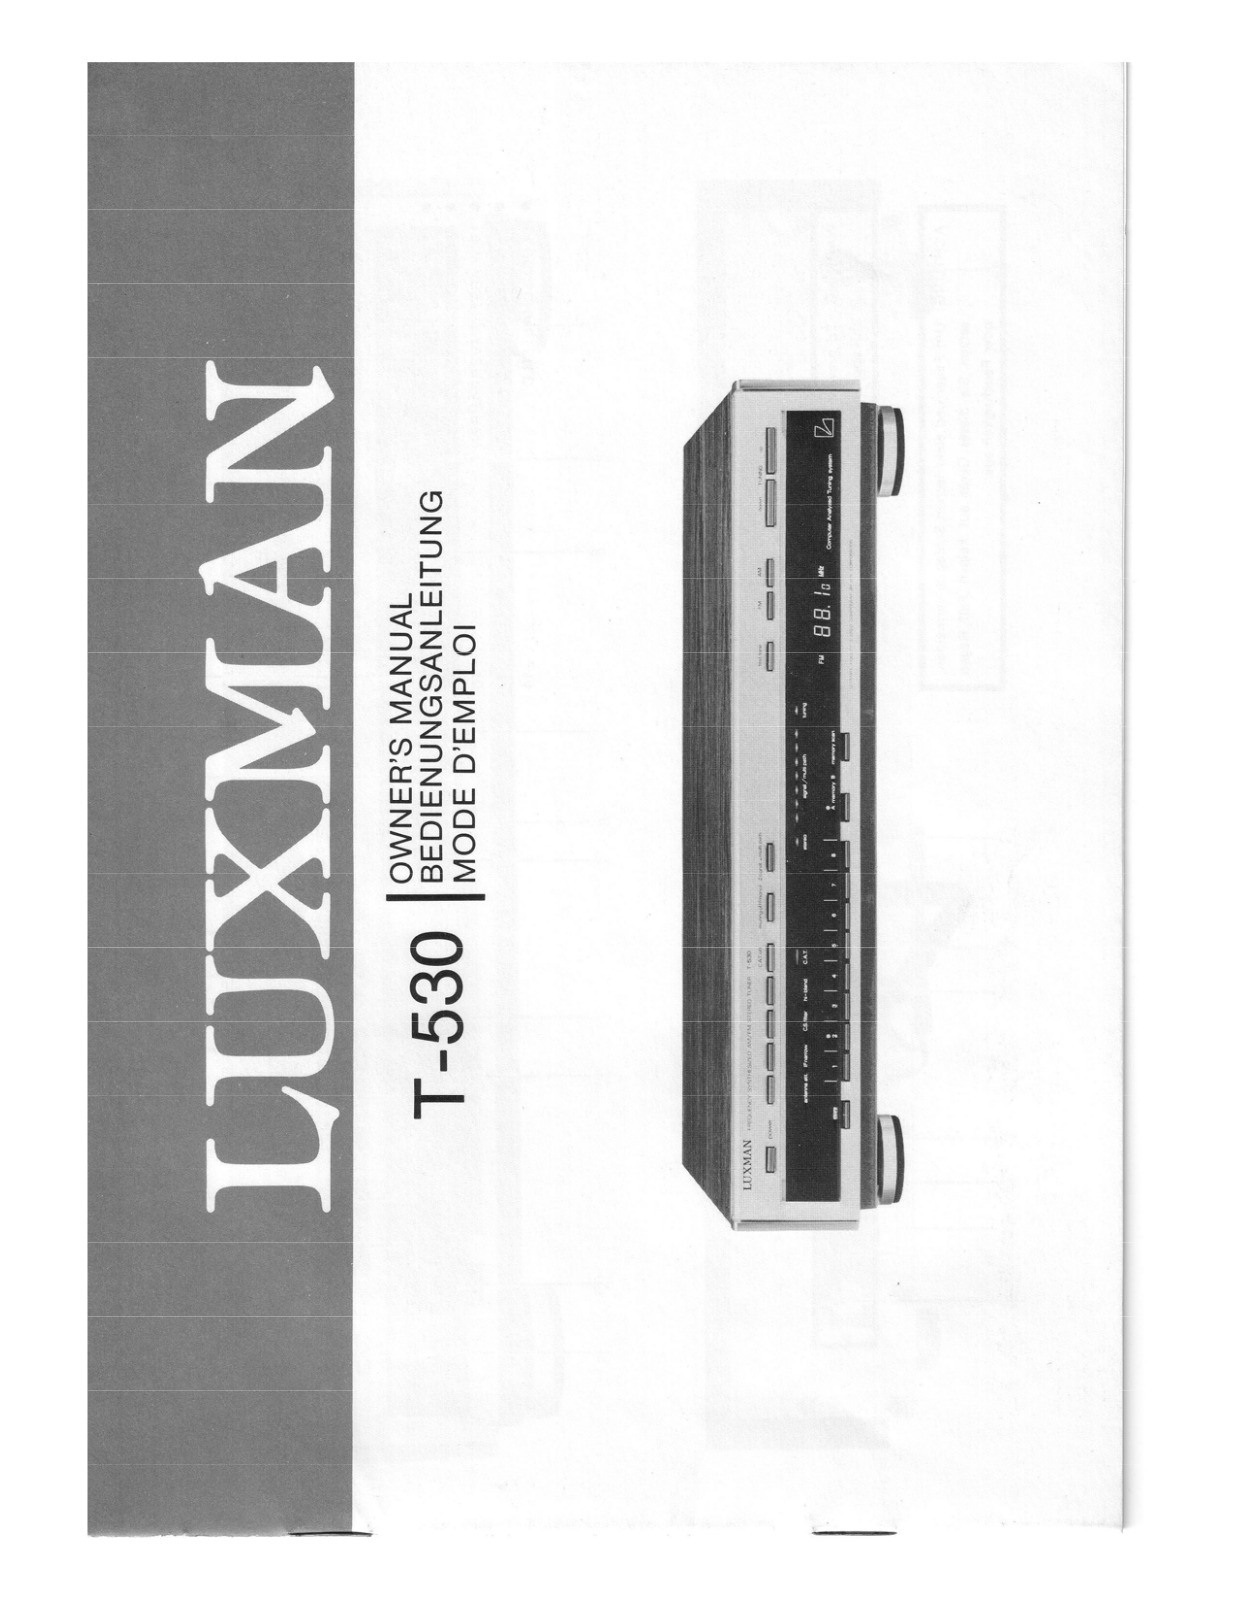 Luxman T-530 Owners manual